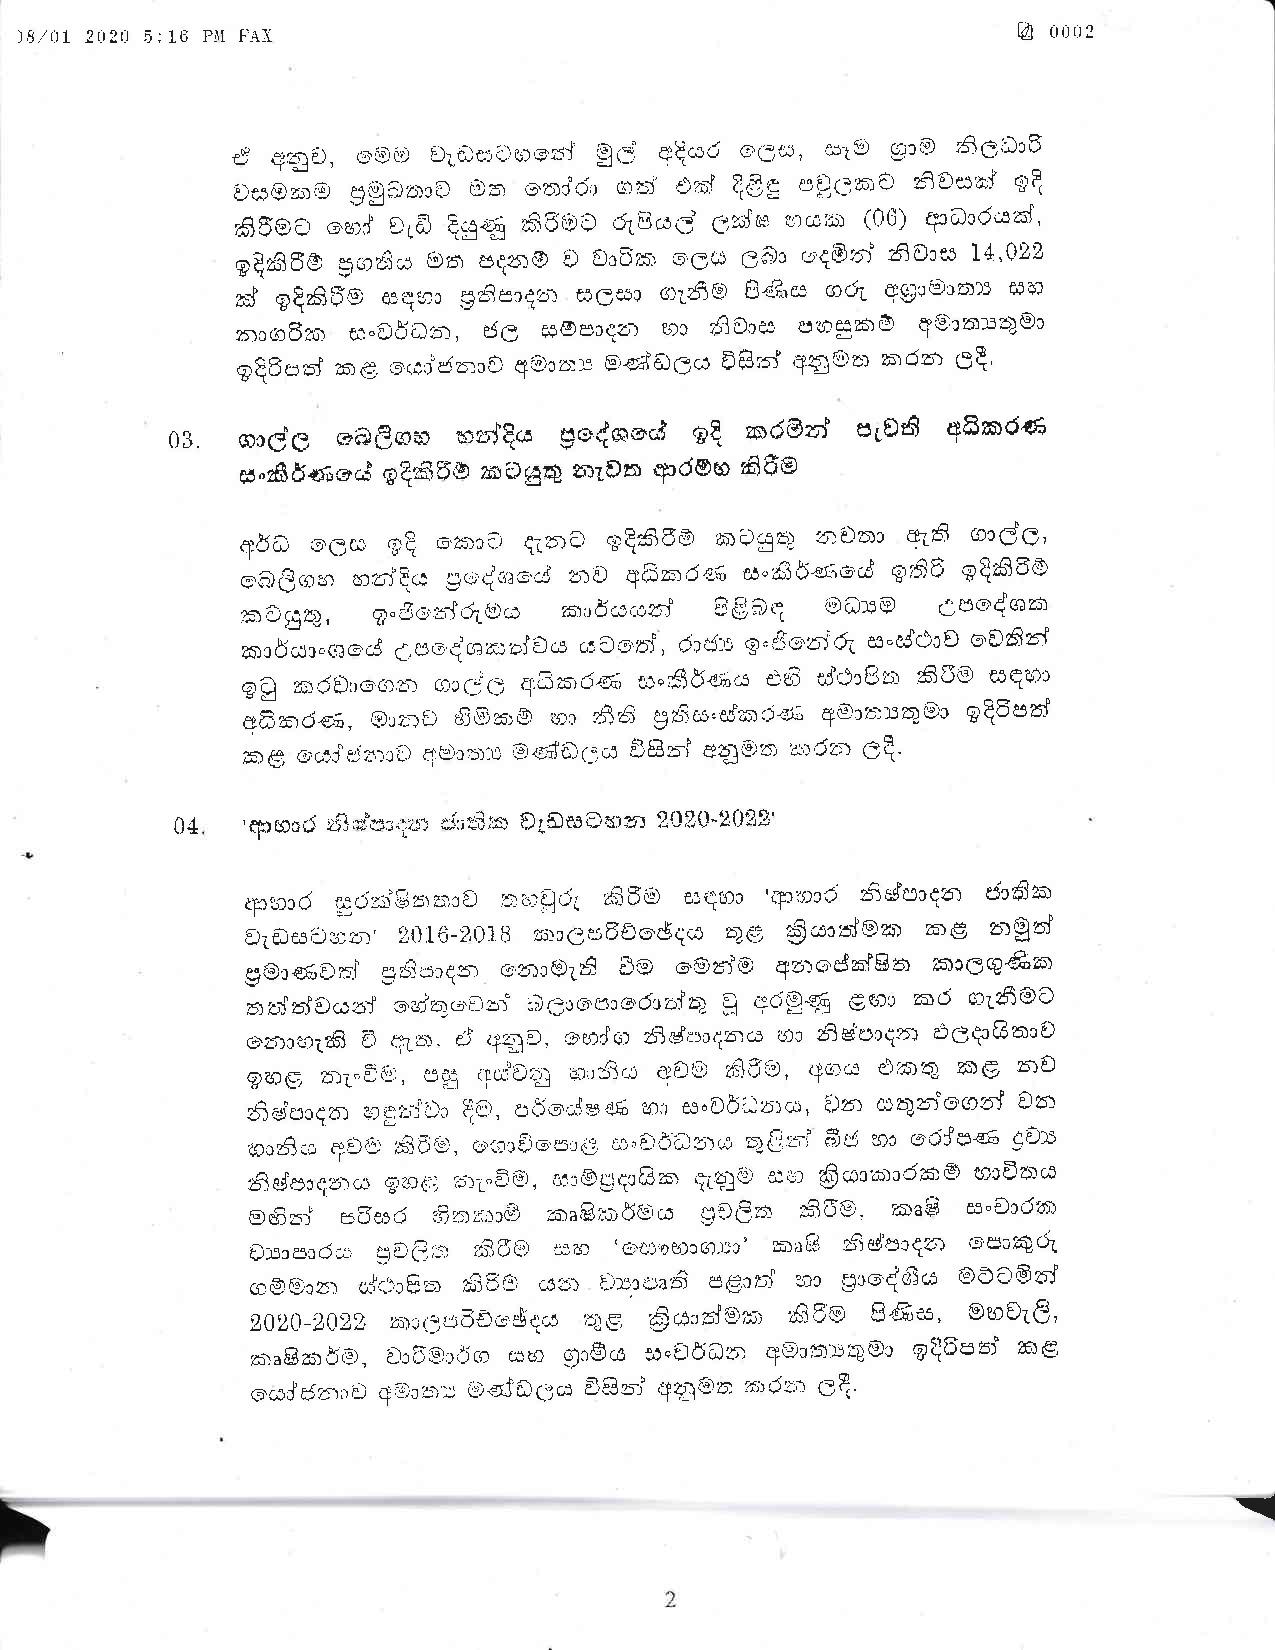 Cabinet Decision on 08.01.2020 page 002